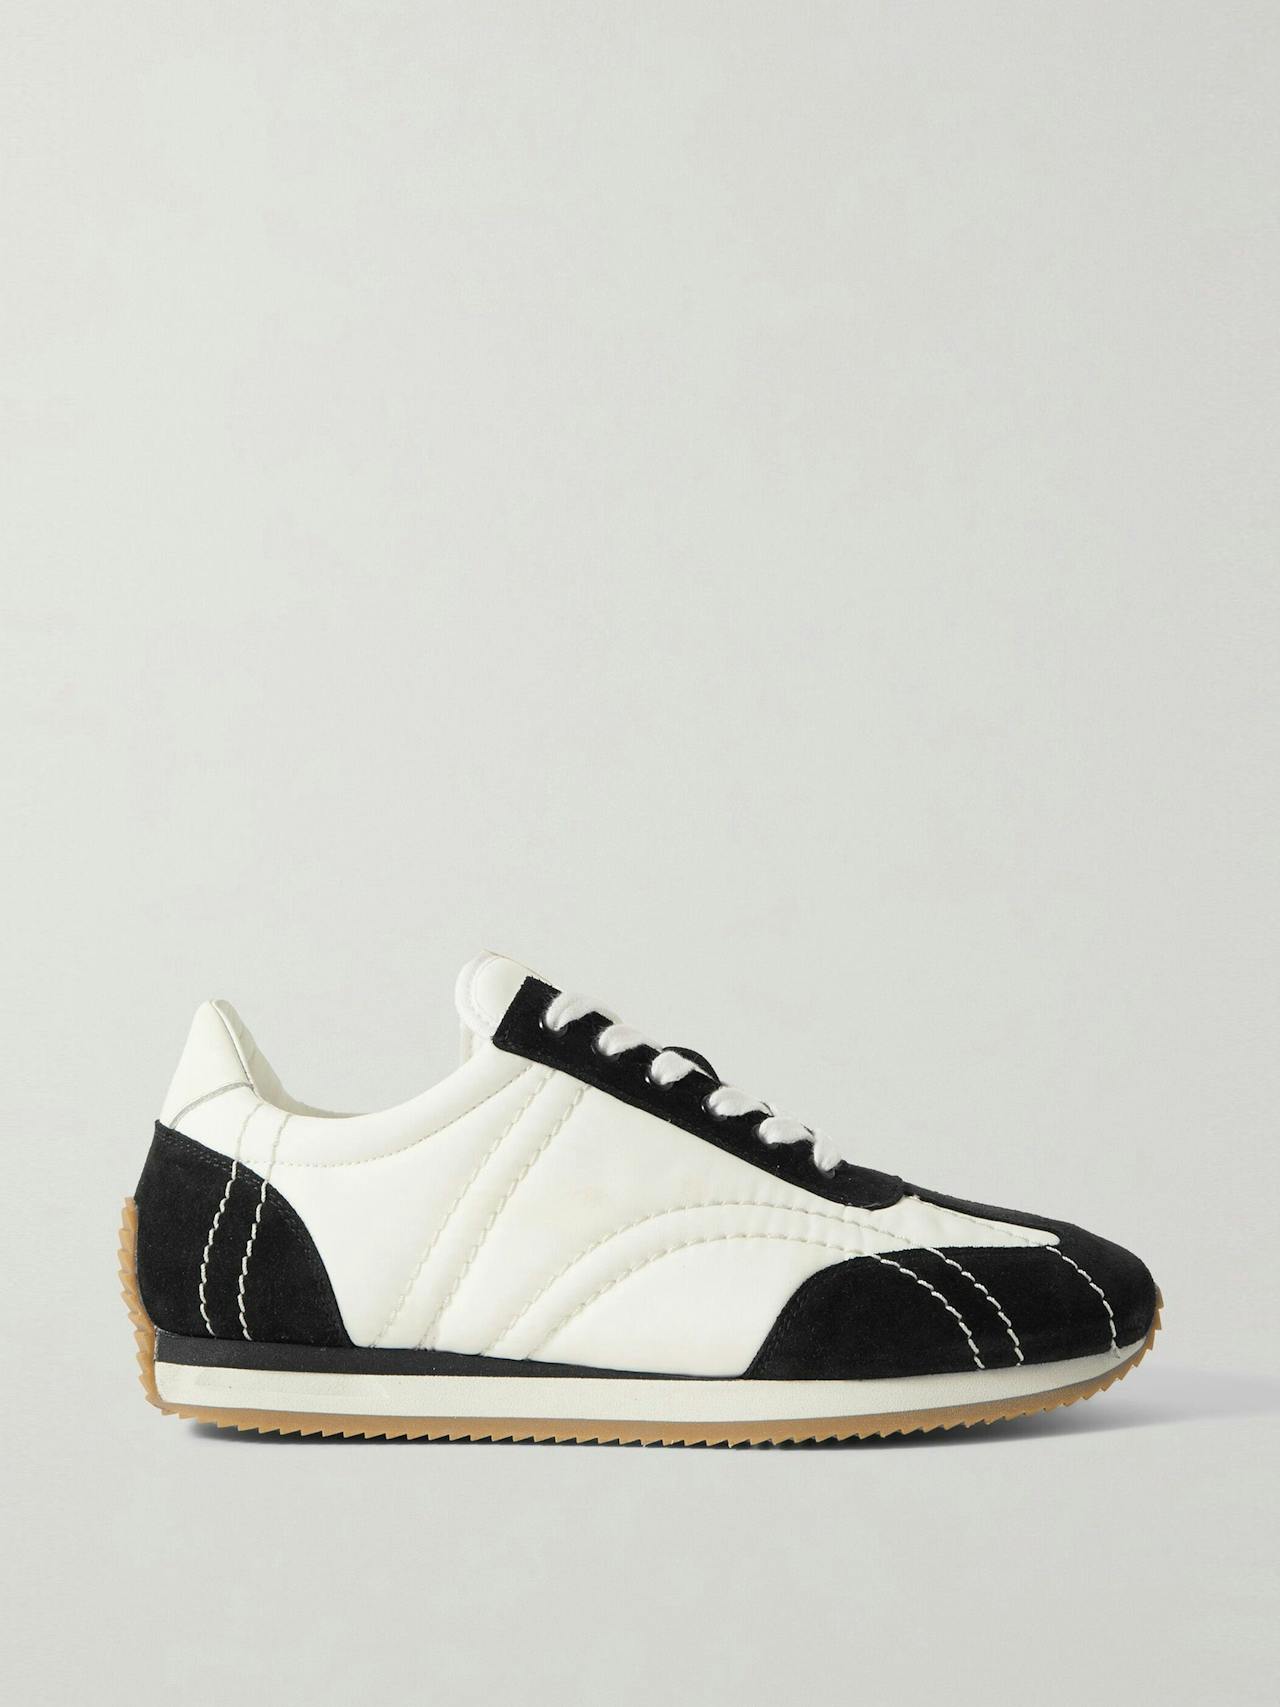 The Sport leather-trimmed suede and shell sneakers